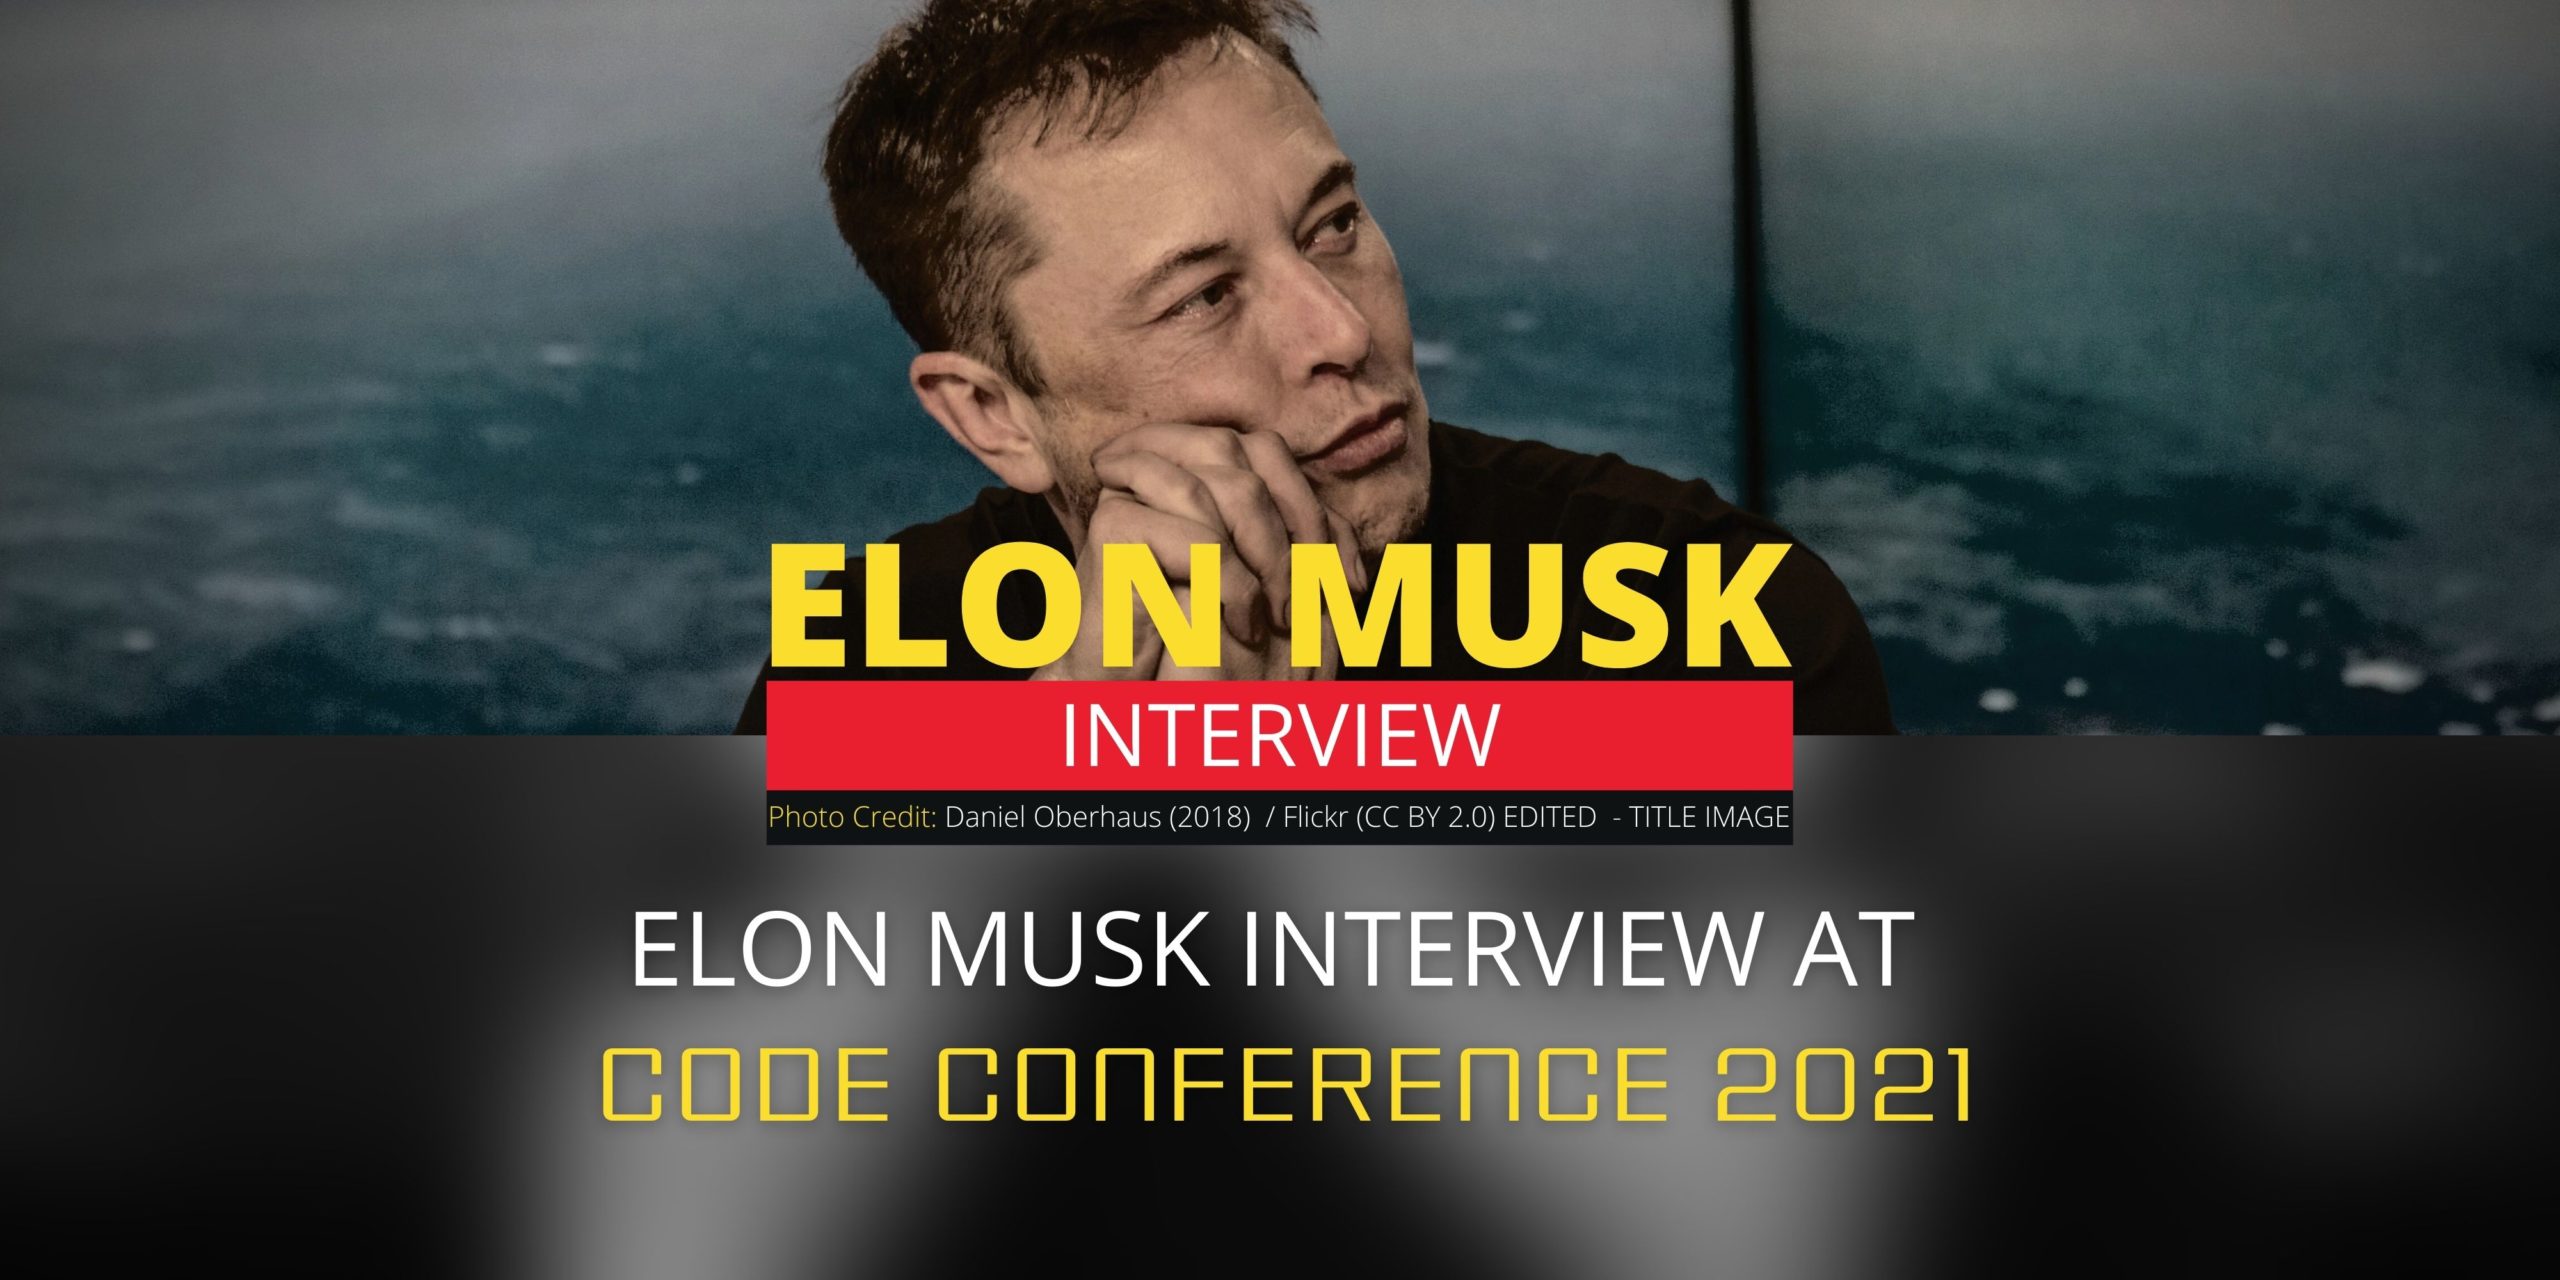 Elon Musk interview at Code Conference 2021 - xlonmusk.com